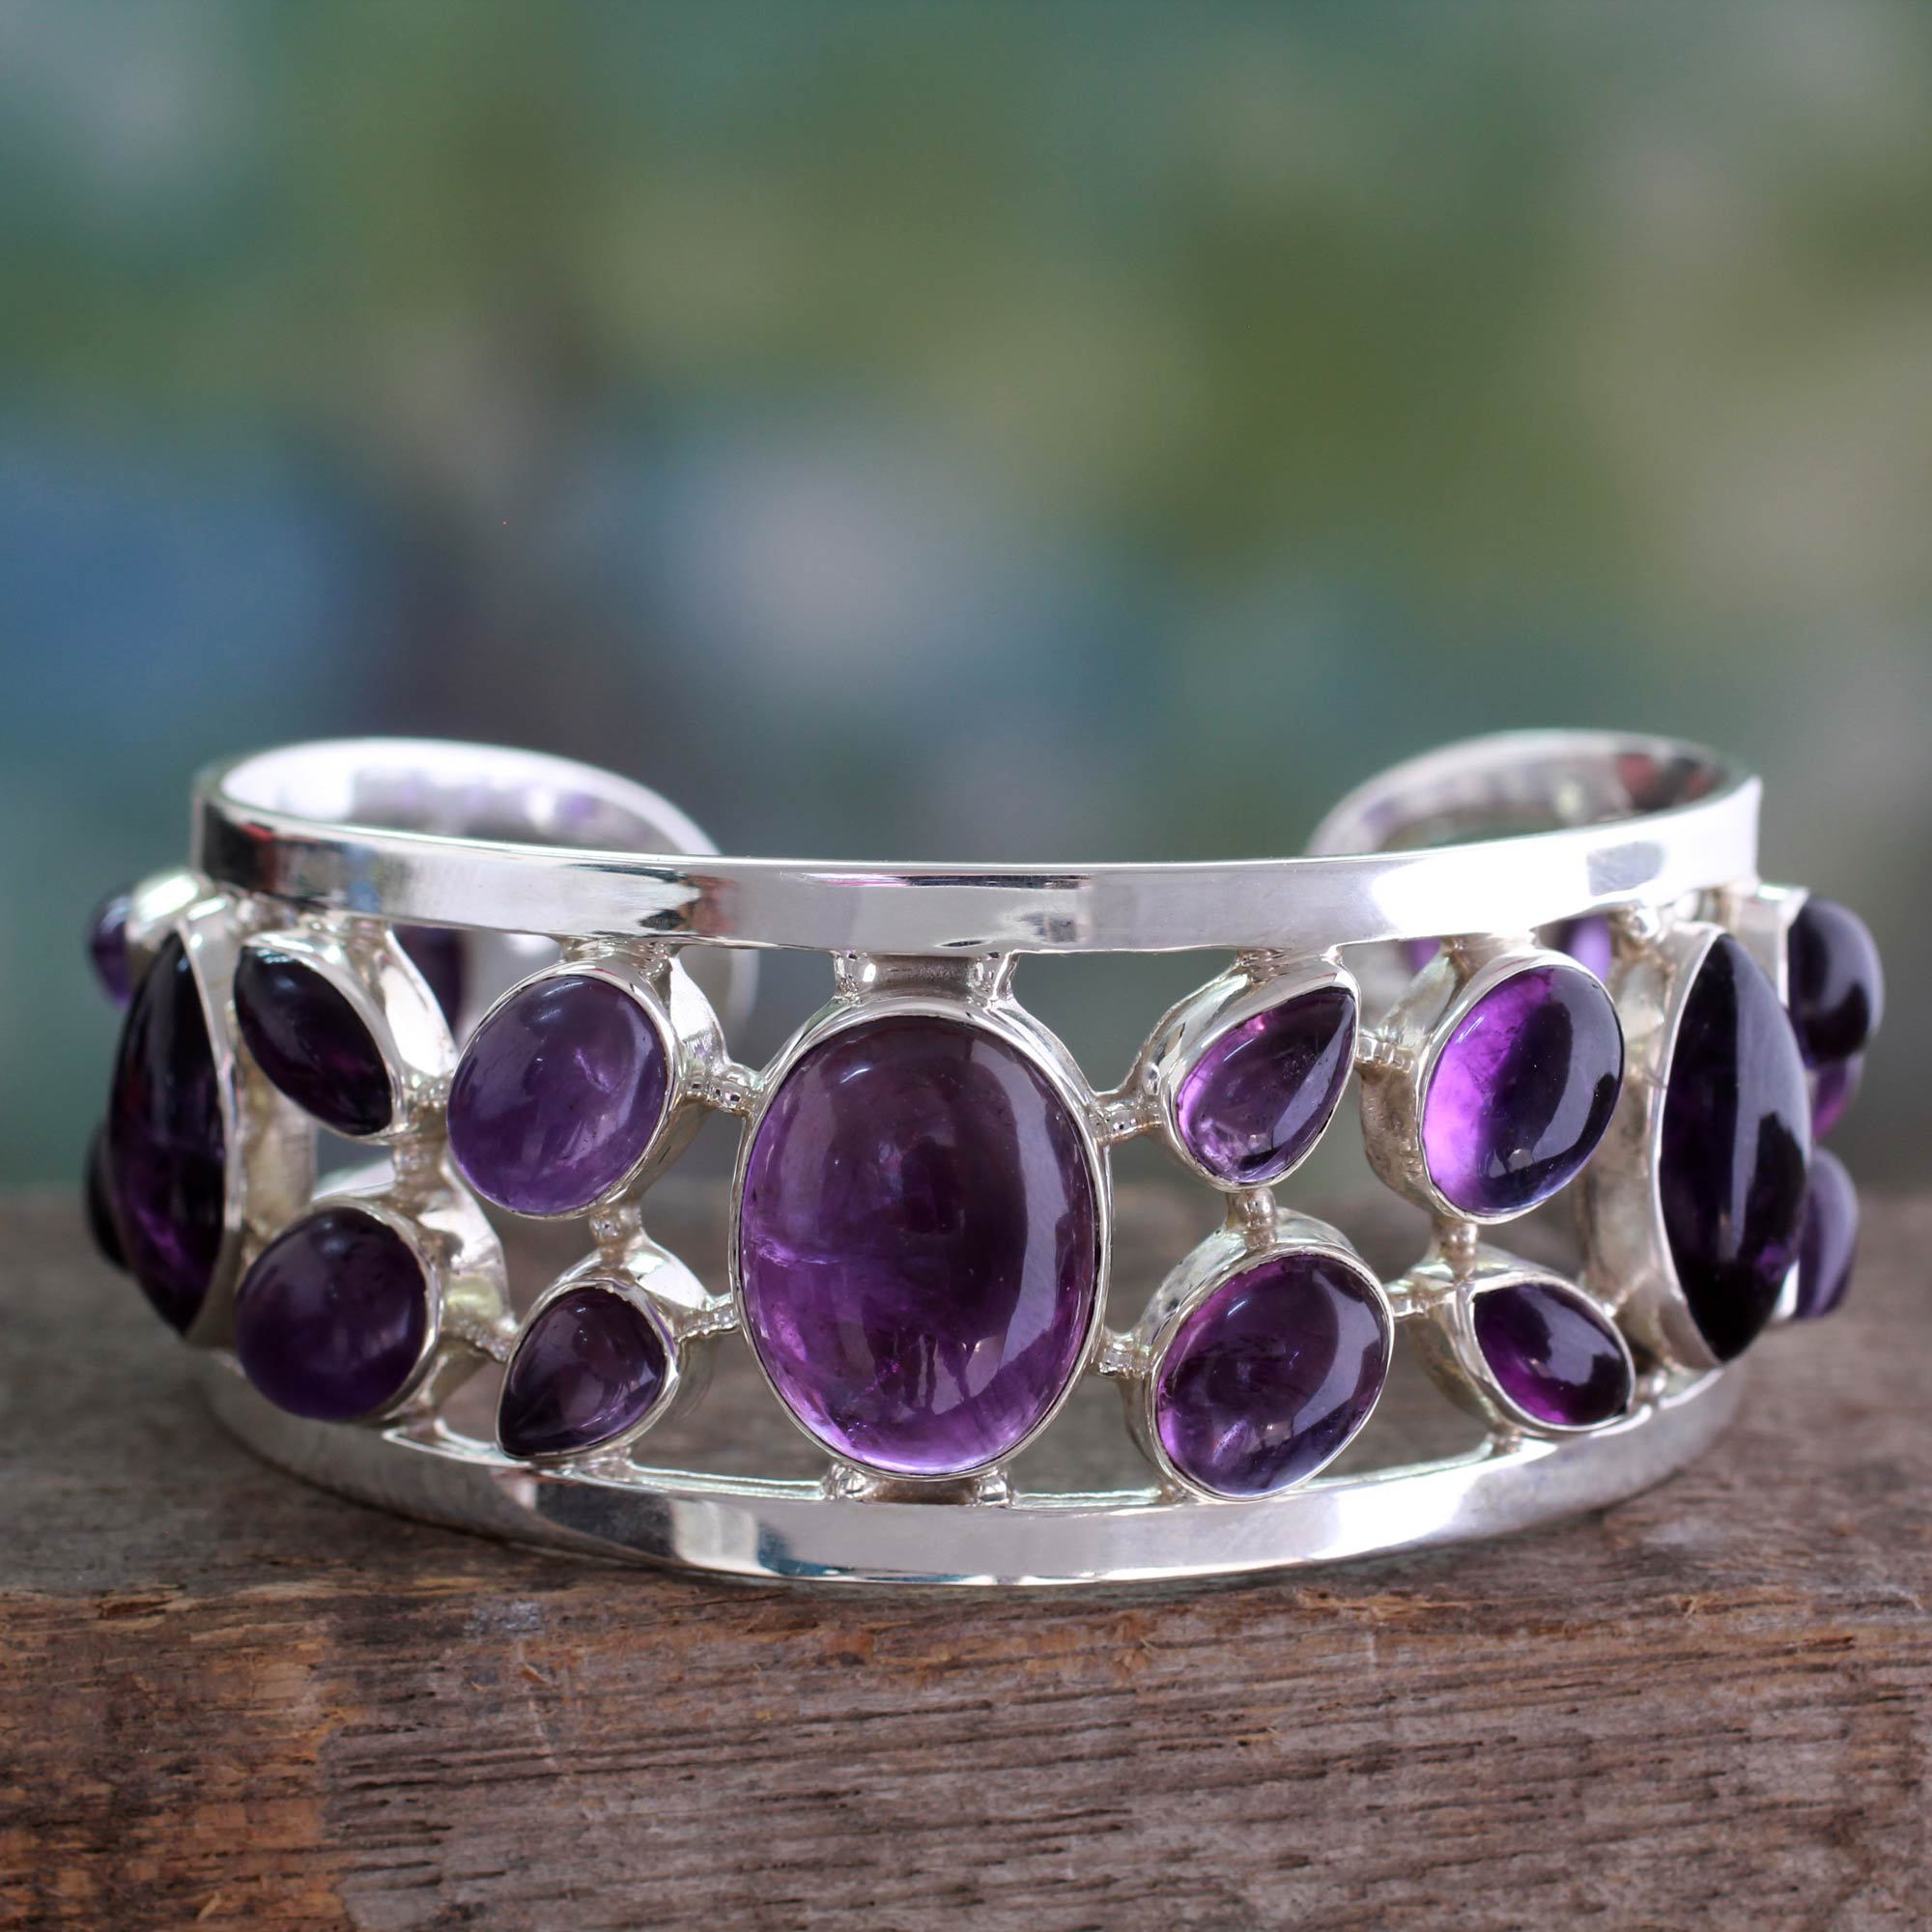 Amethyst Studded Sterling Silver Cuff Bracelet from India - Purple